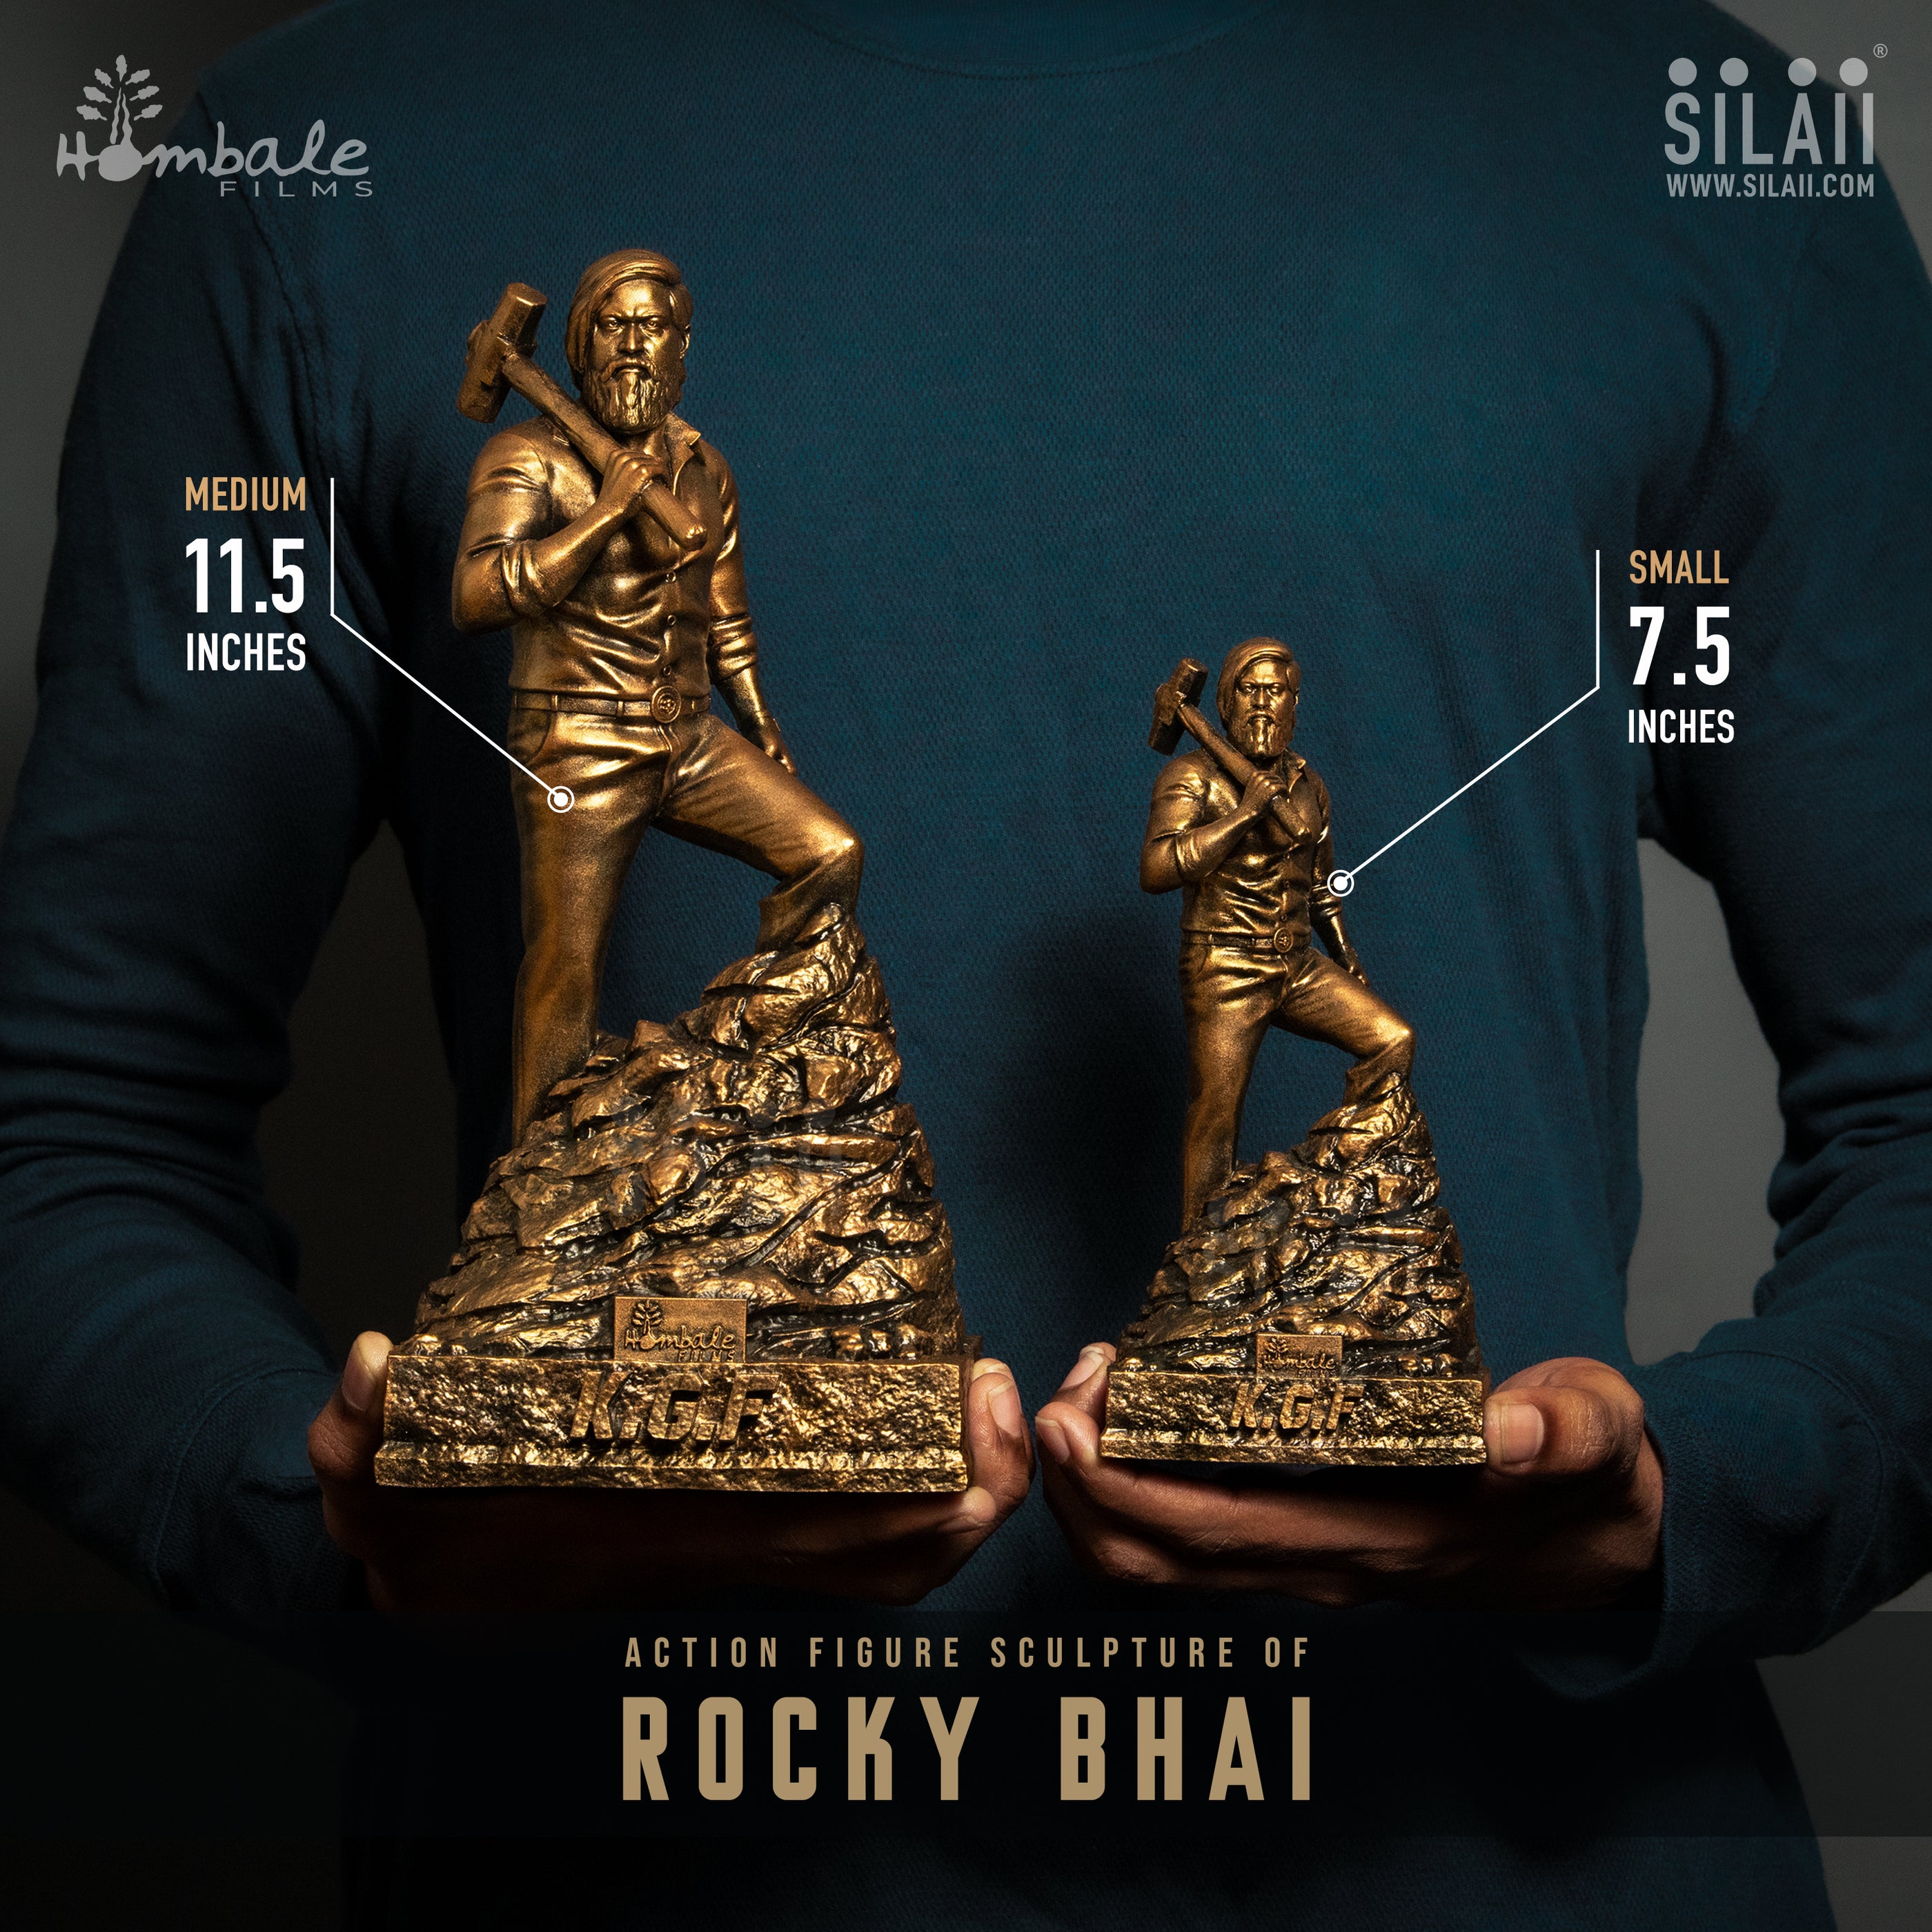 Action Figure Sculpture Of Rocky Bhai from KGF Universe